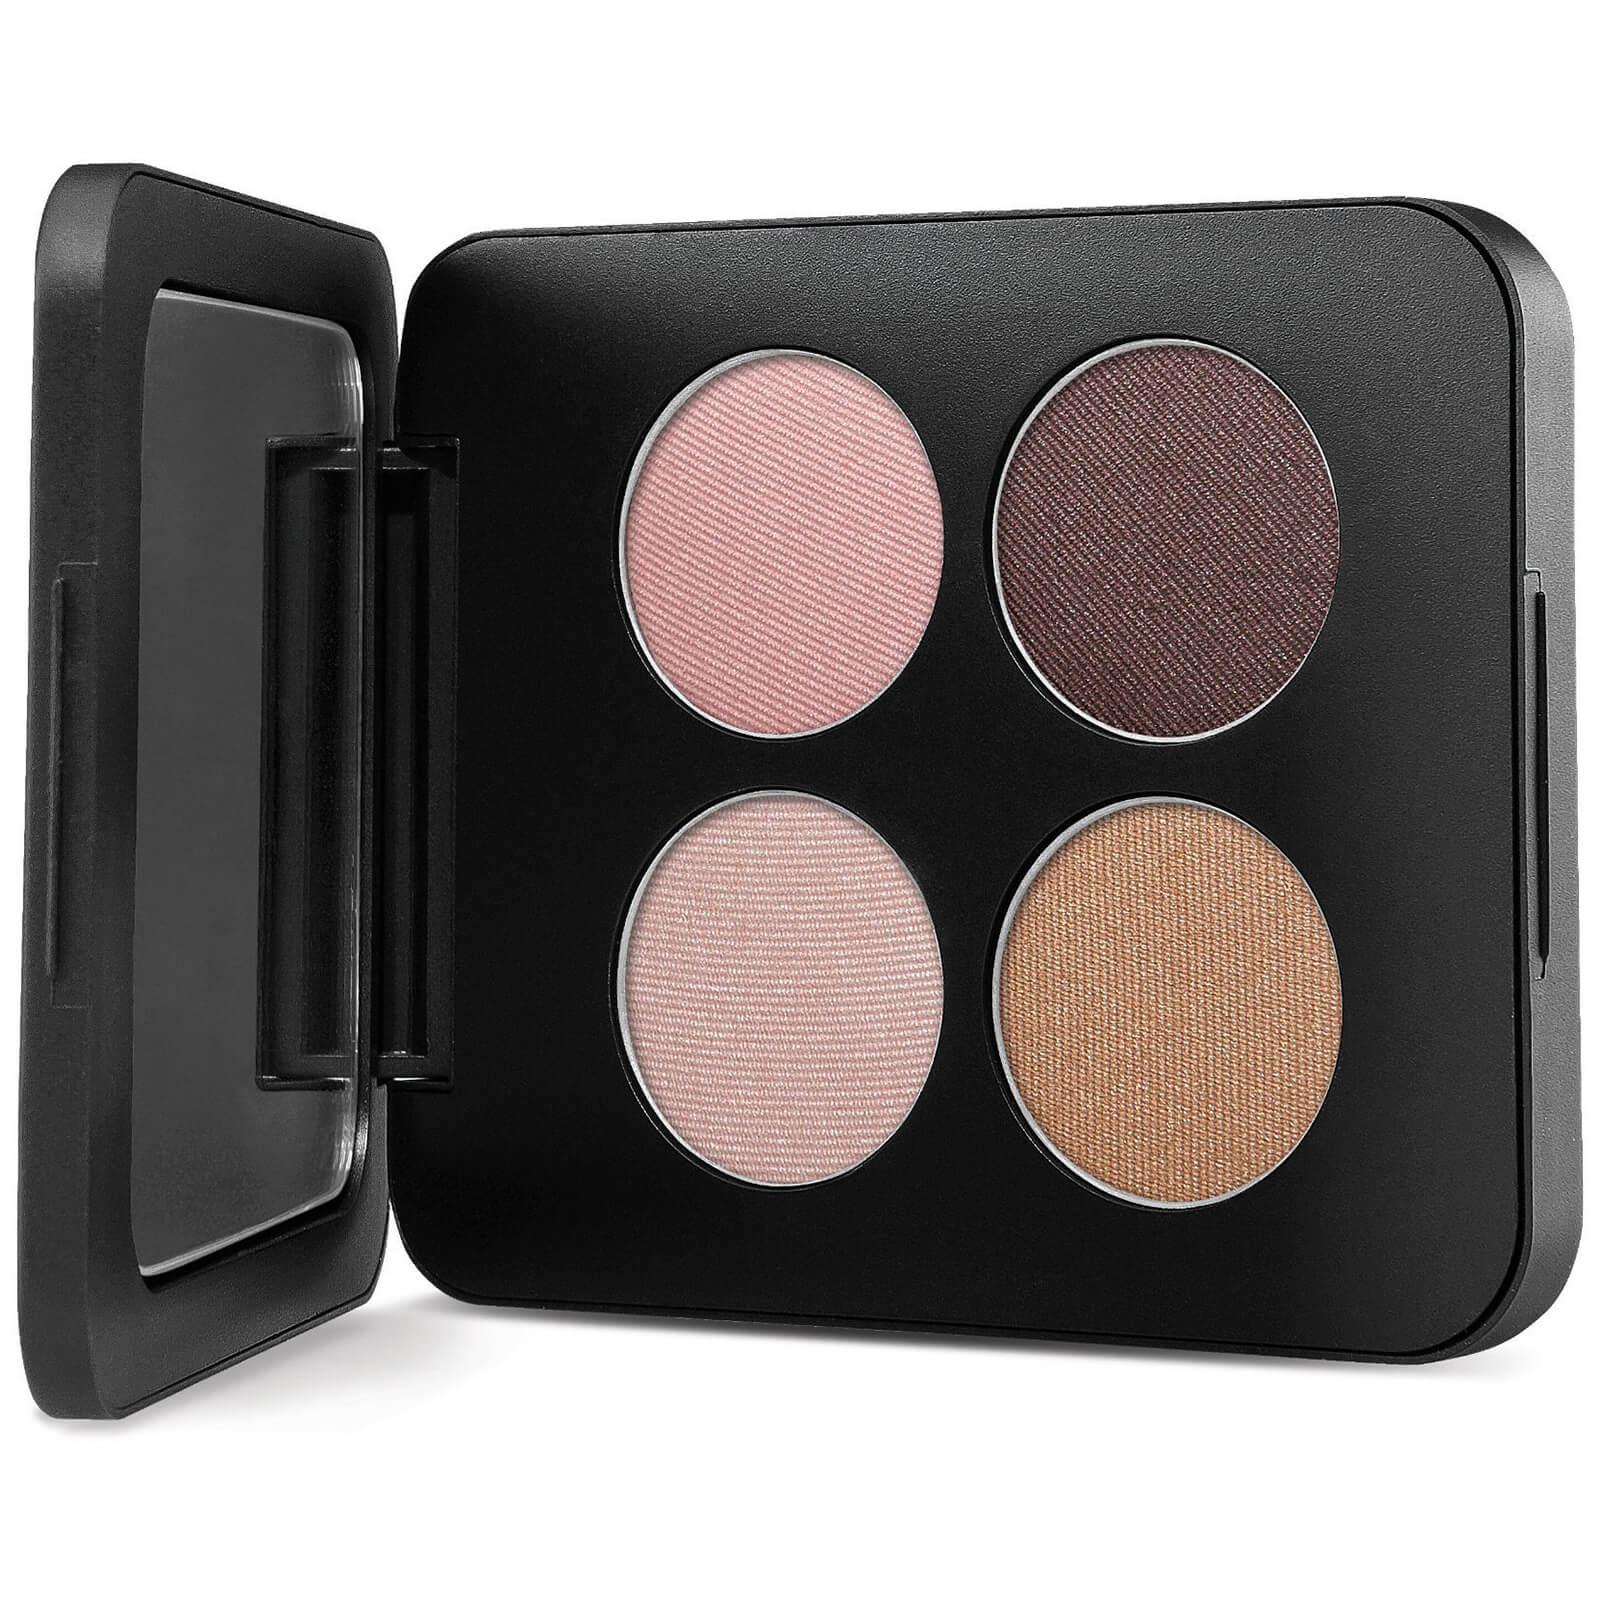 Youngblood Mineral Cosmetics Youngblood Pressed Mineral Eyeshadow Quad 4g (Various Shades) - Eternity